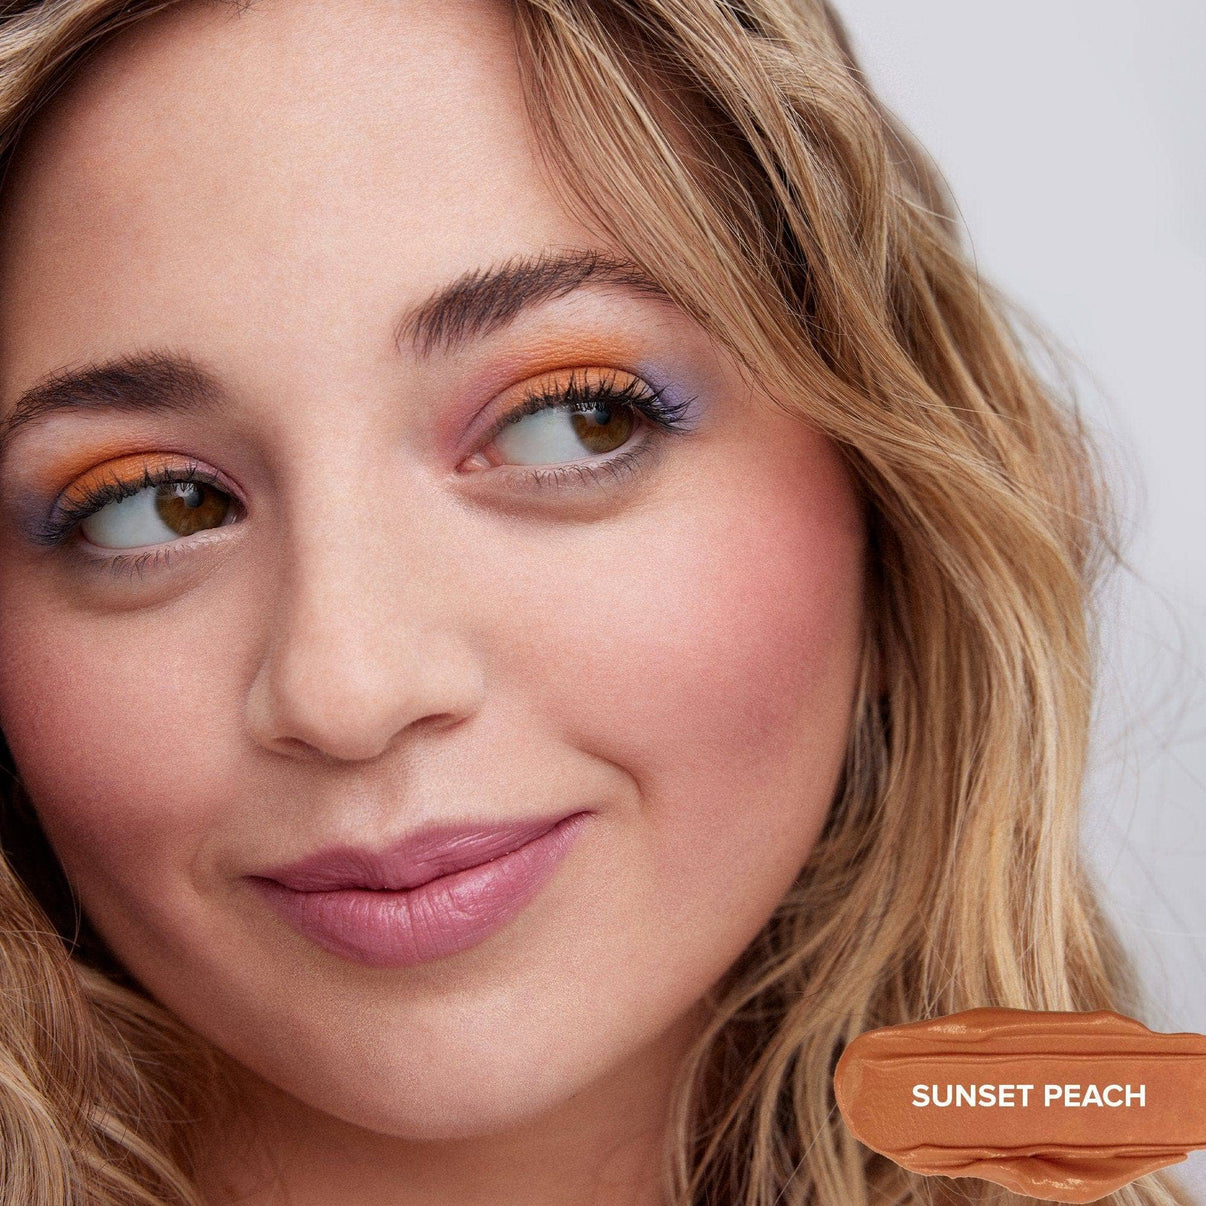 Ally Frankel wearing Magnetic Plush Paints in shade sunset peach